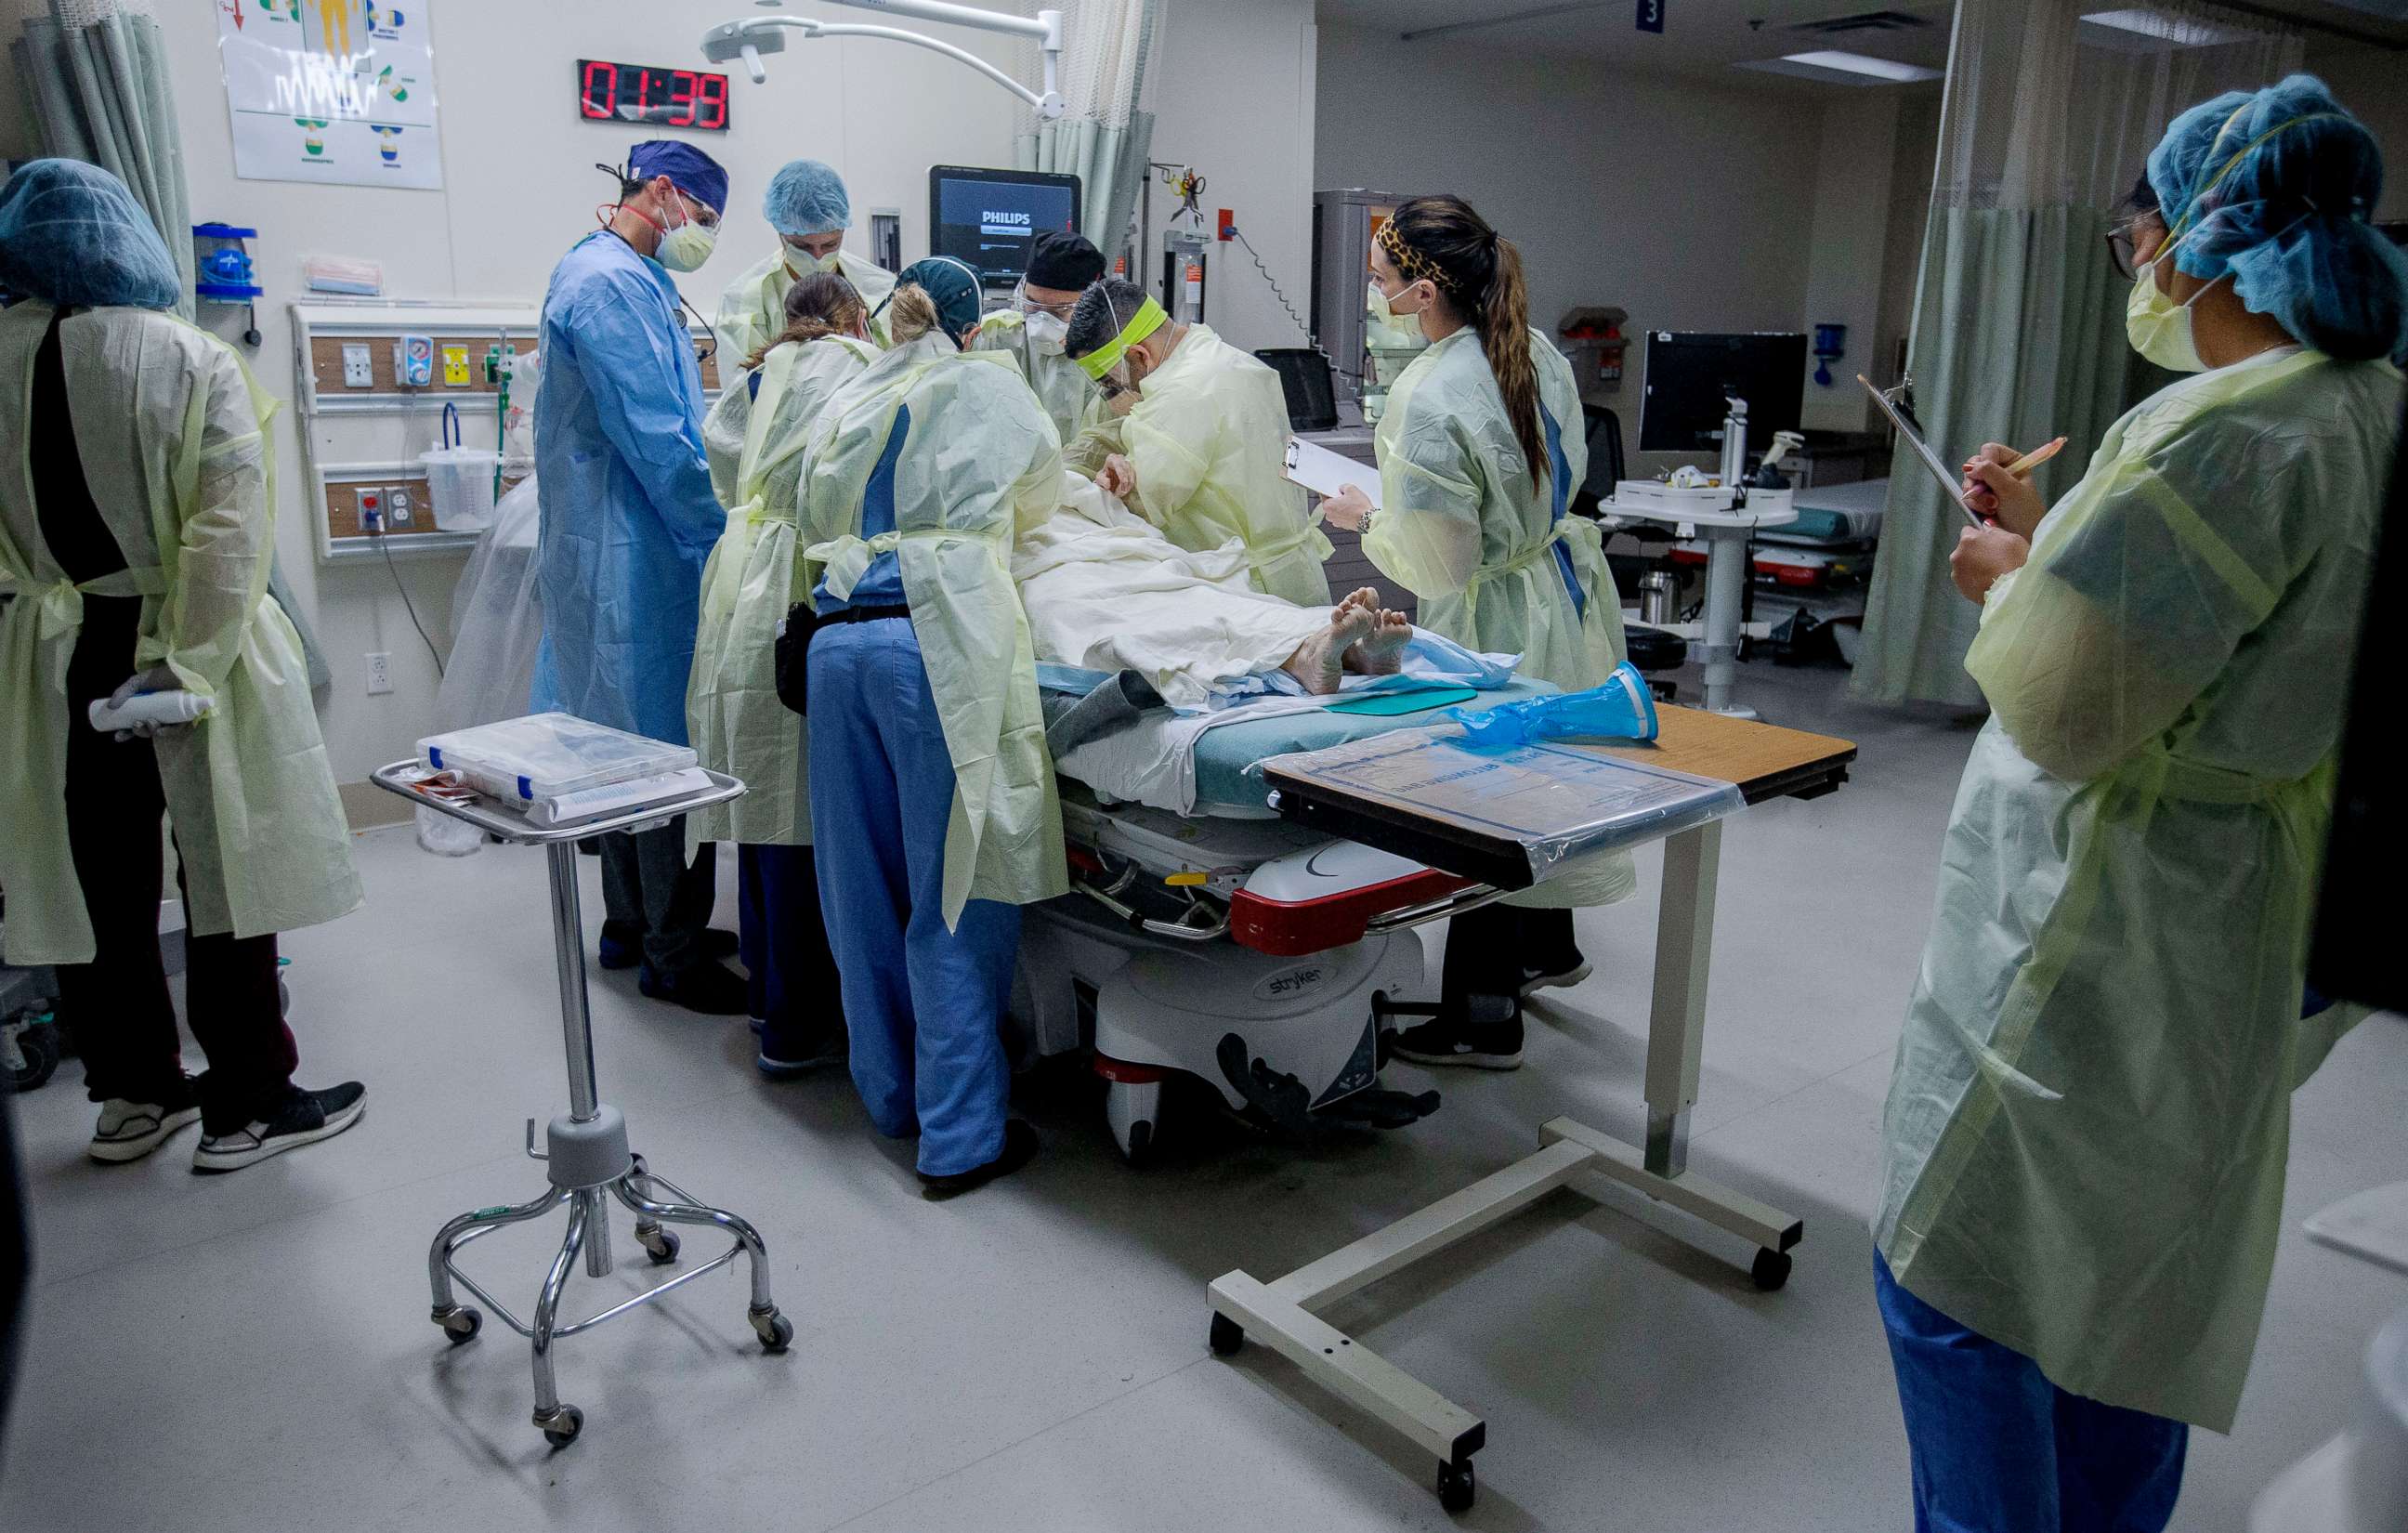 PHOTO: Medical workers help a patient in the emergency room at Riverside University Health System in Moreno Valley, Calif., June 26, 2020.